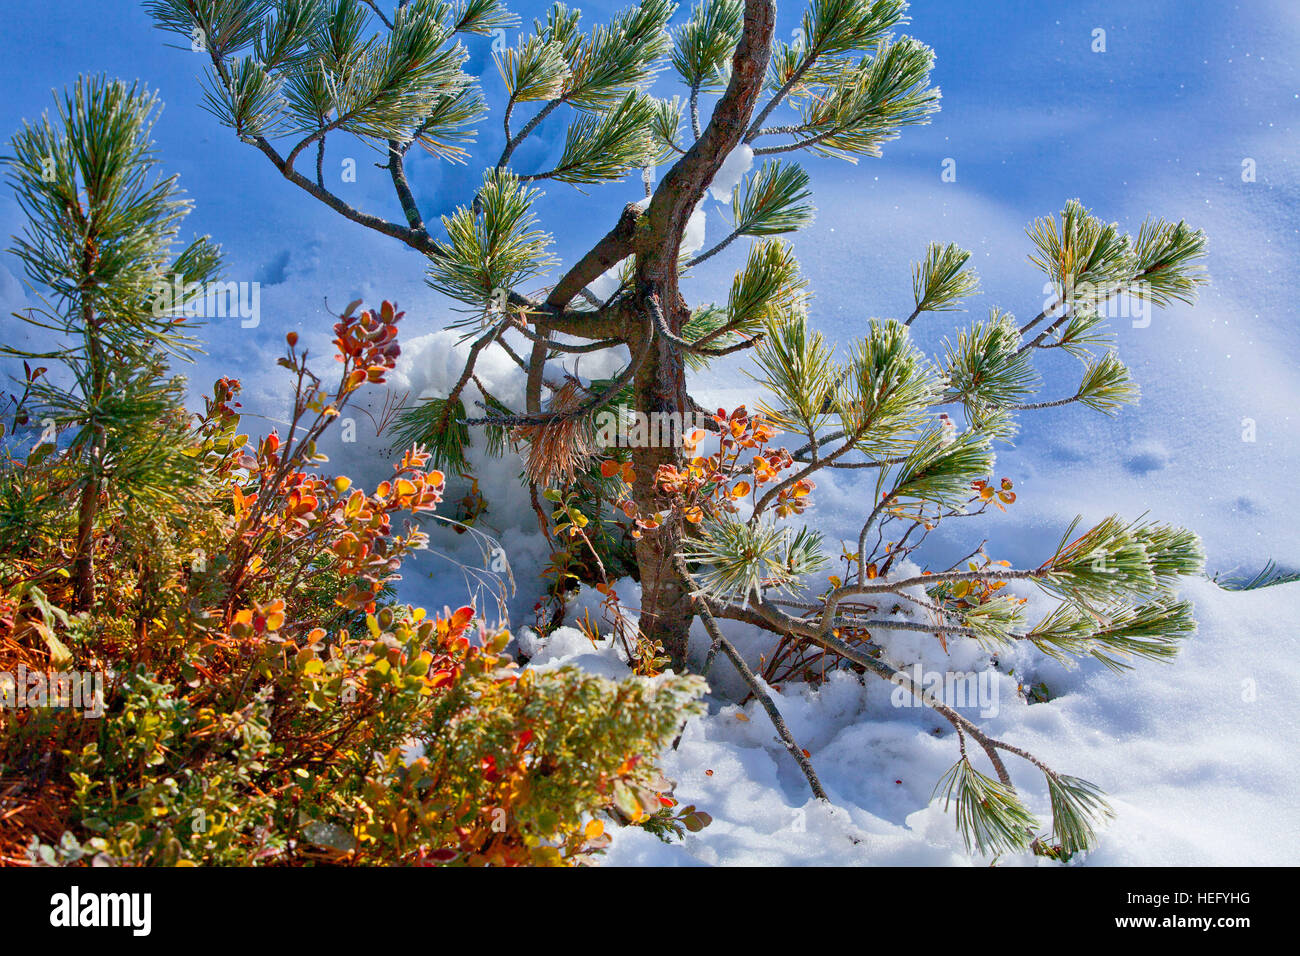 Young pine with blueberry shrub, onset of winter Stock Photo